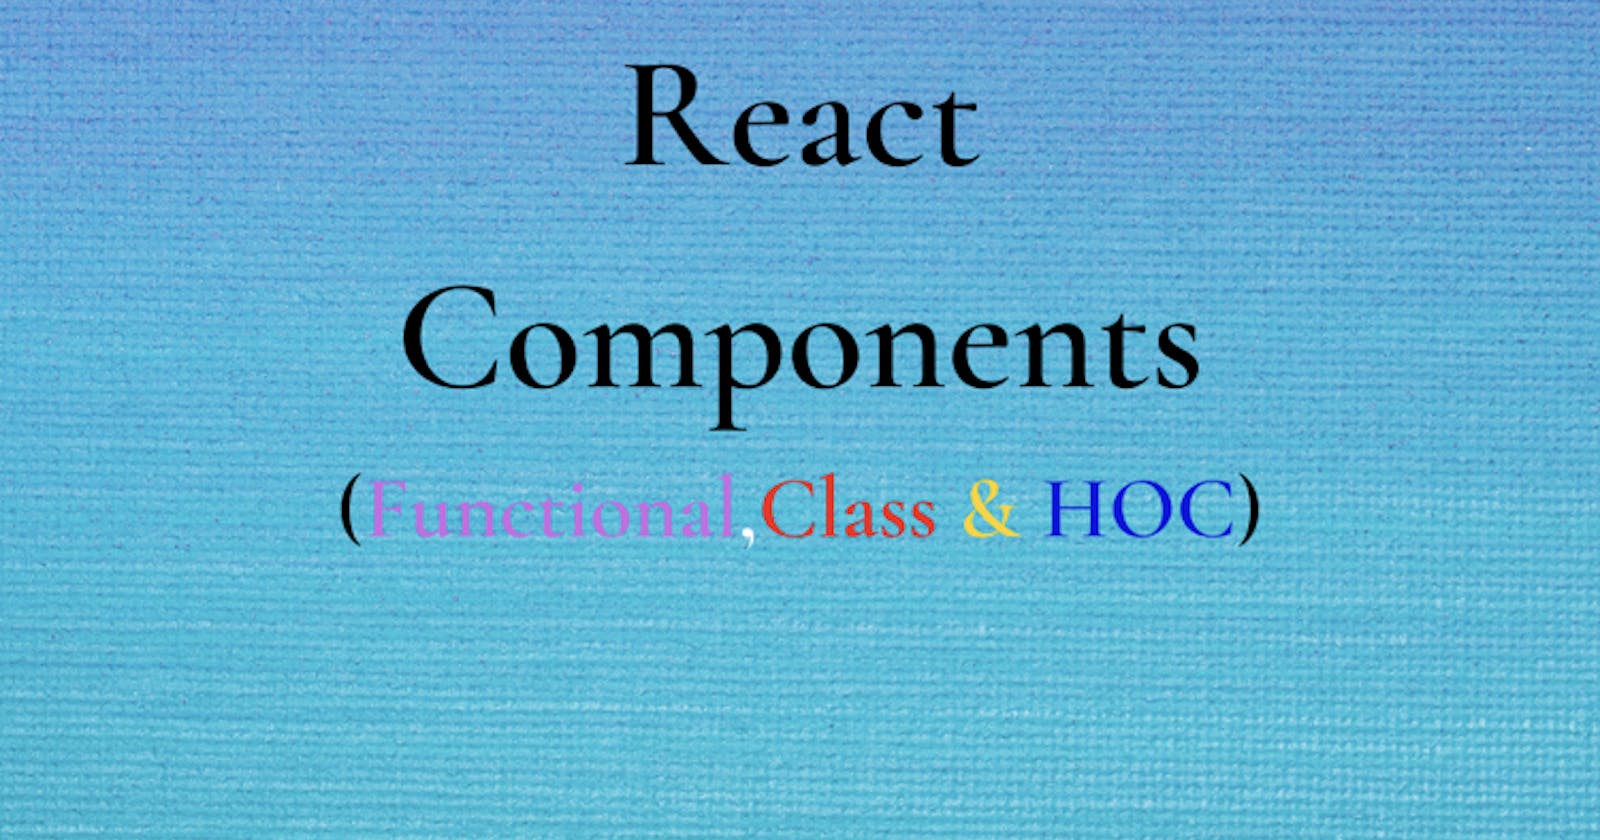 The React components (Functional, Class & HOC)